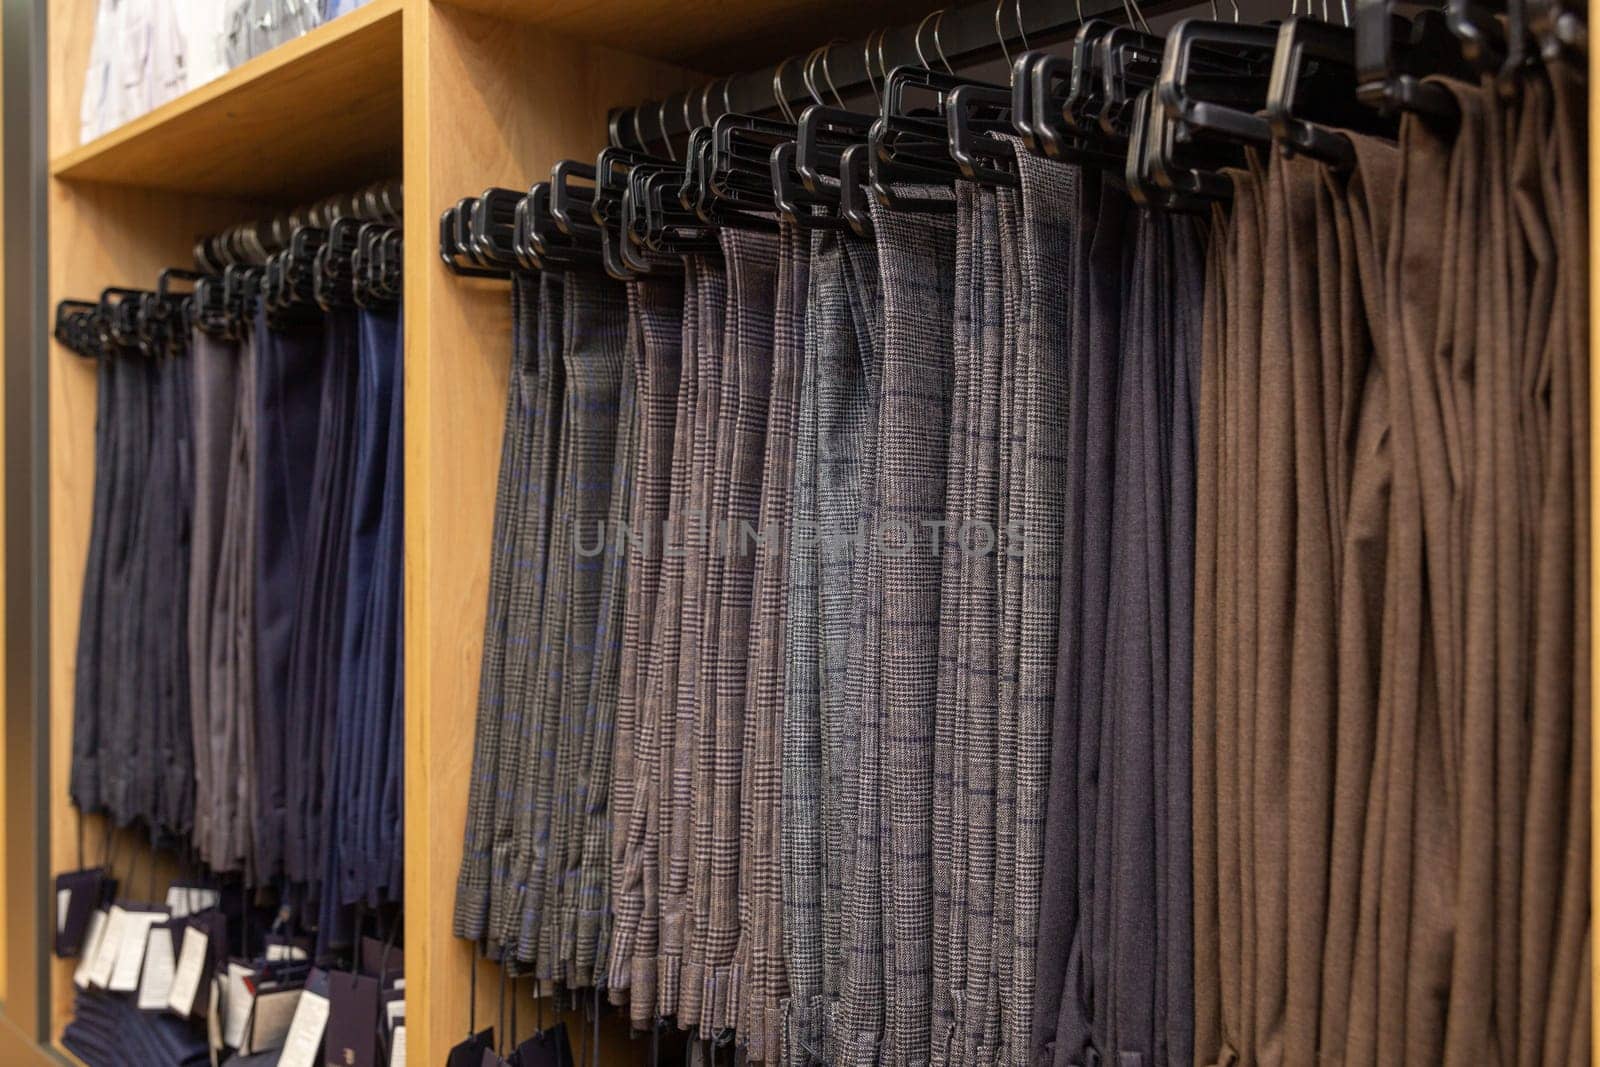 Men's classic trousers on hangers in a boutique. Showcase with many men's trousers hanging on hangers in stock on hangers in a men's clothing store.